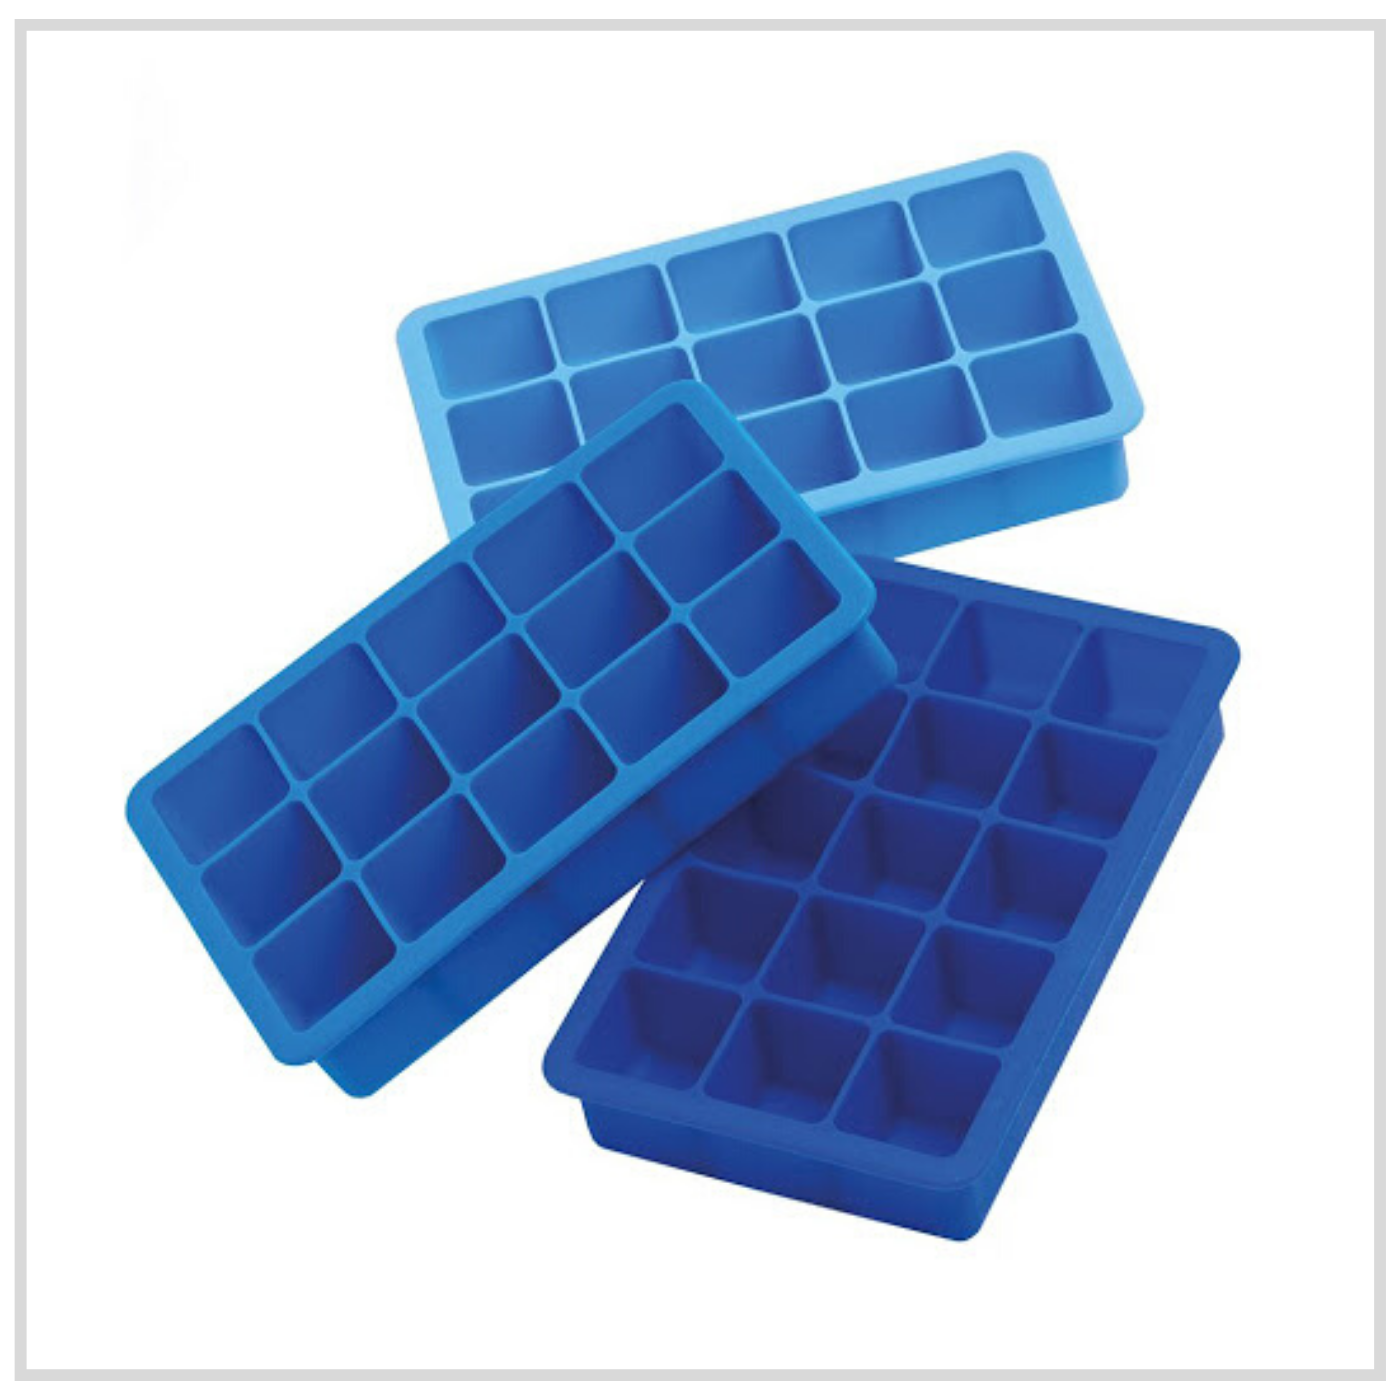 Epicurean Triple Pack Ice Cube Tray - 3 Shades